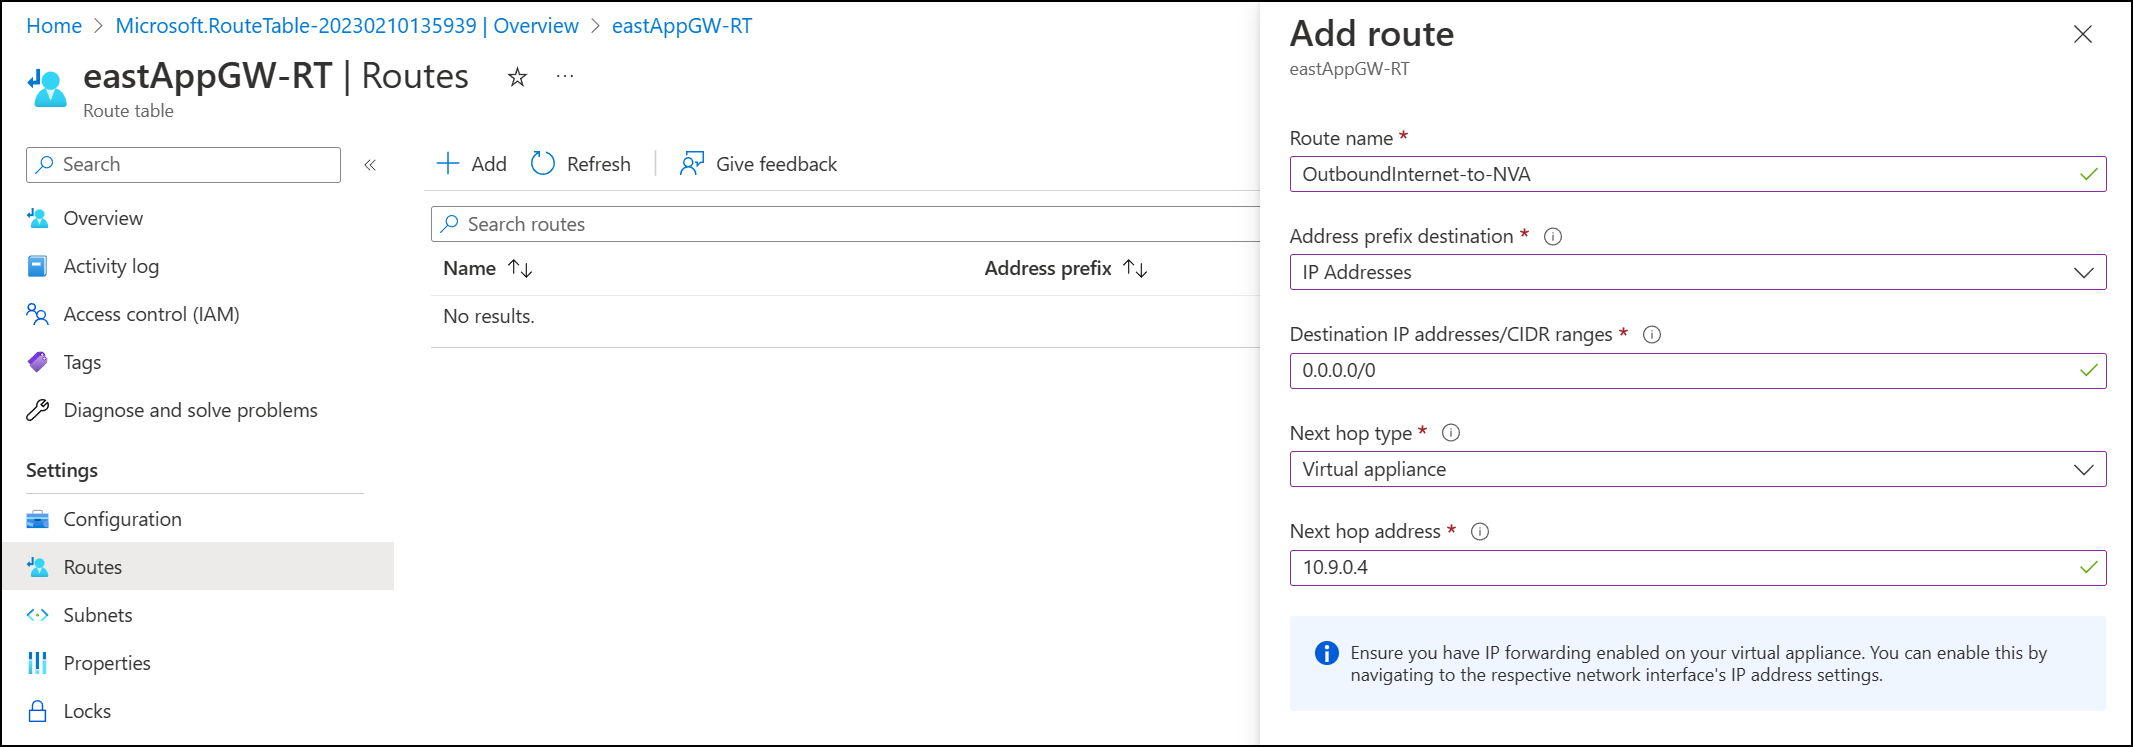 View of adding default route to network virtual applicance